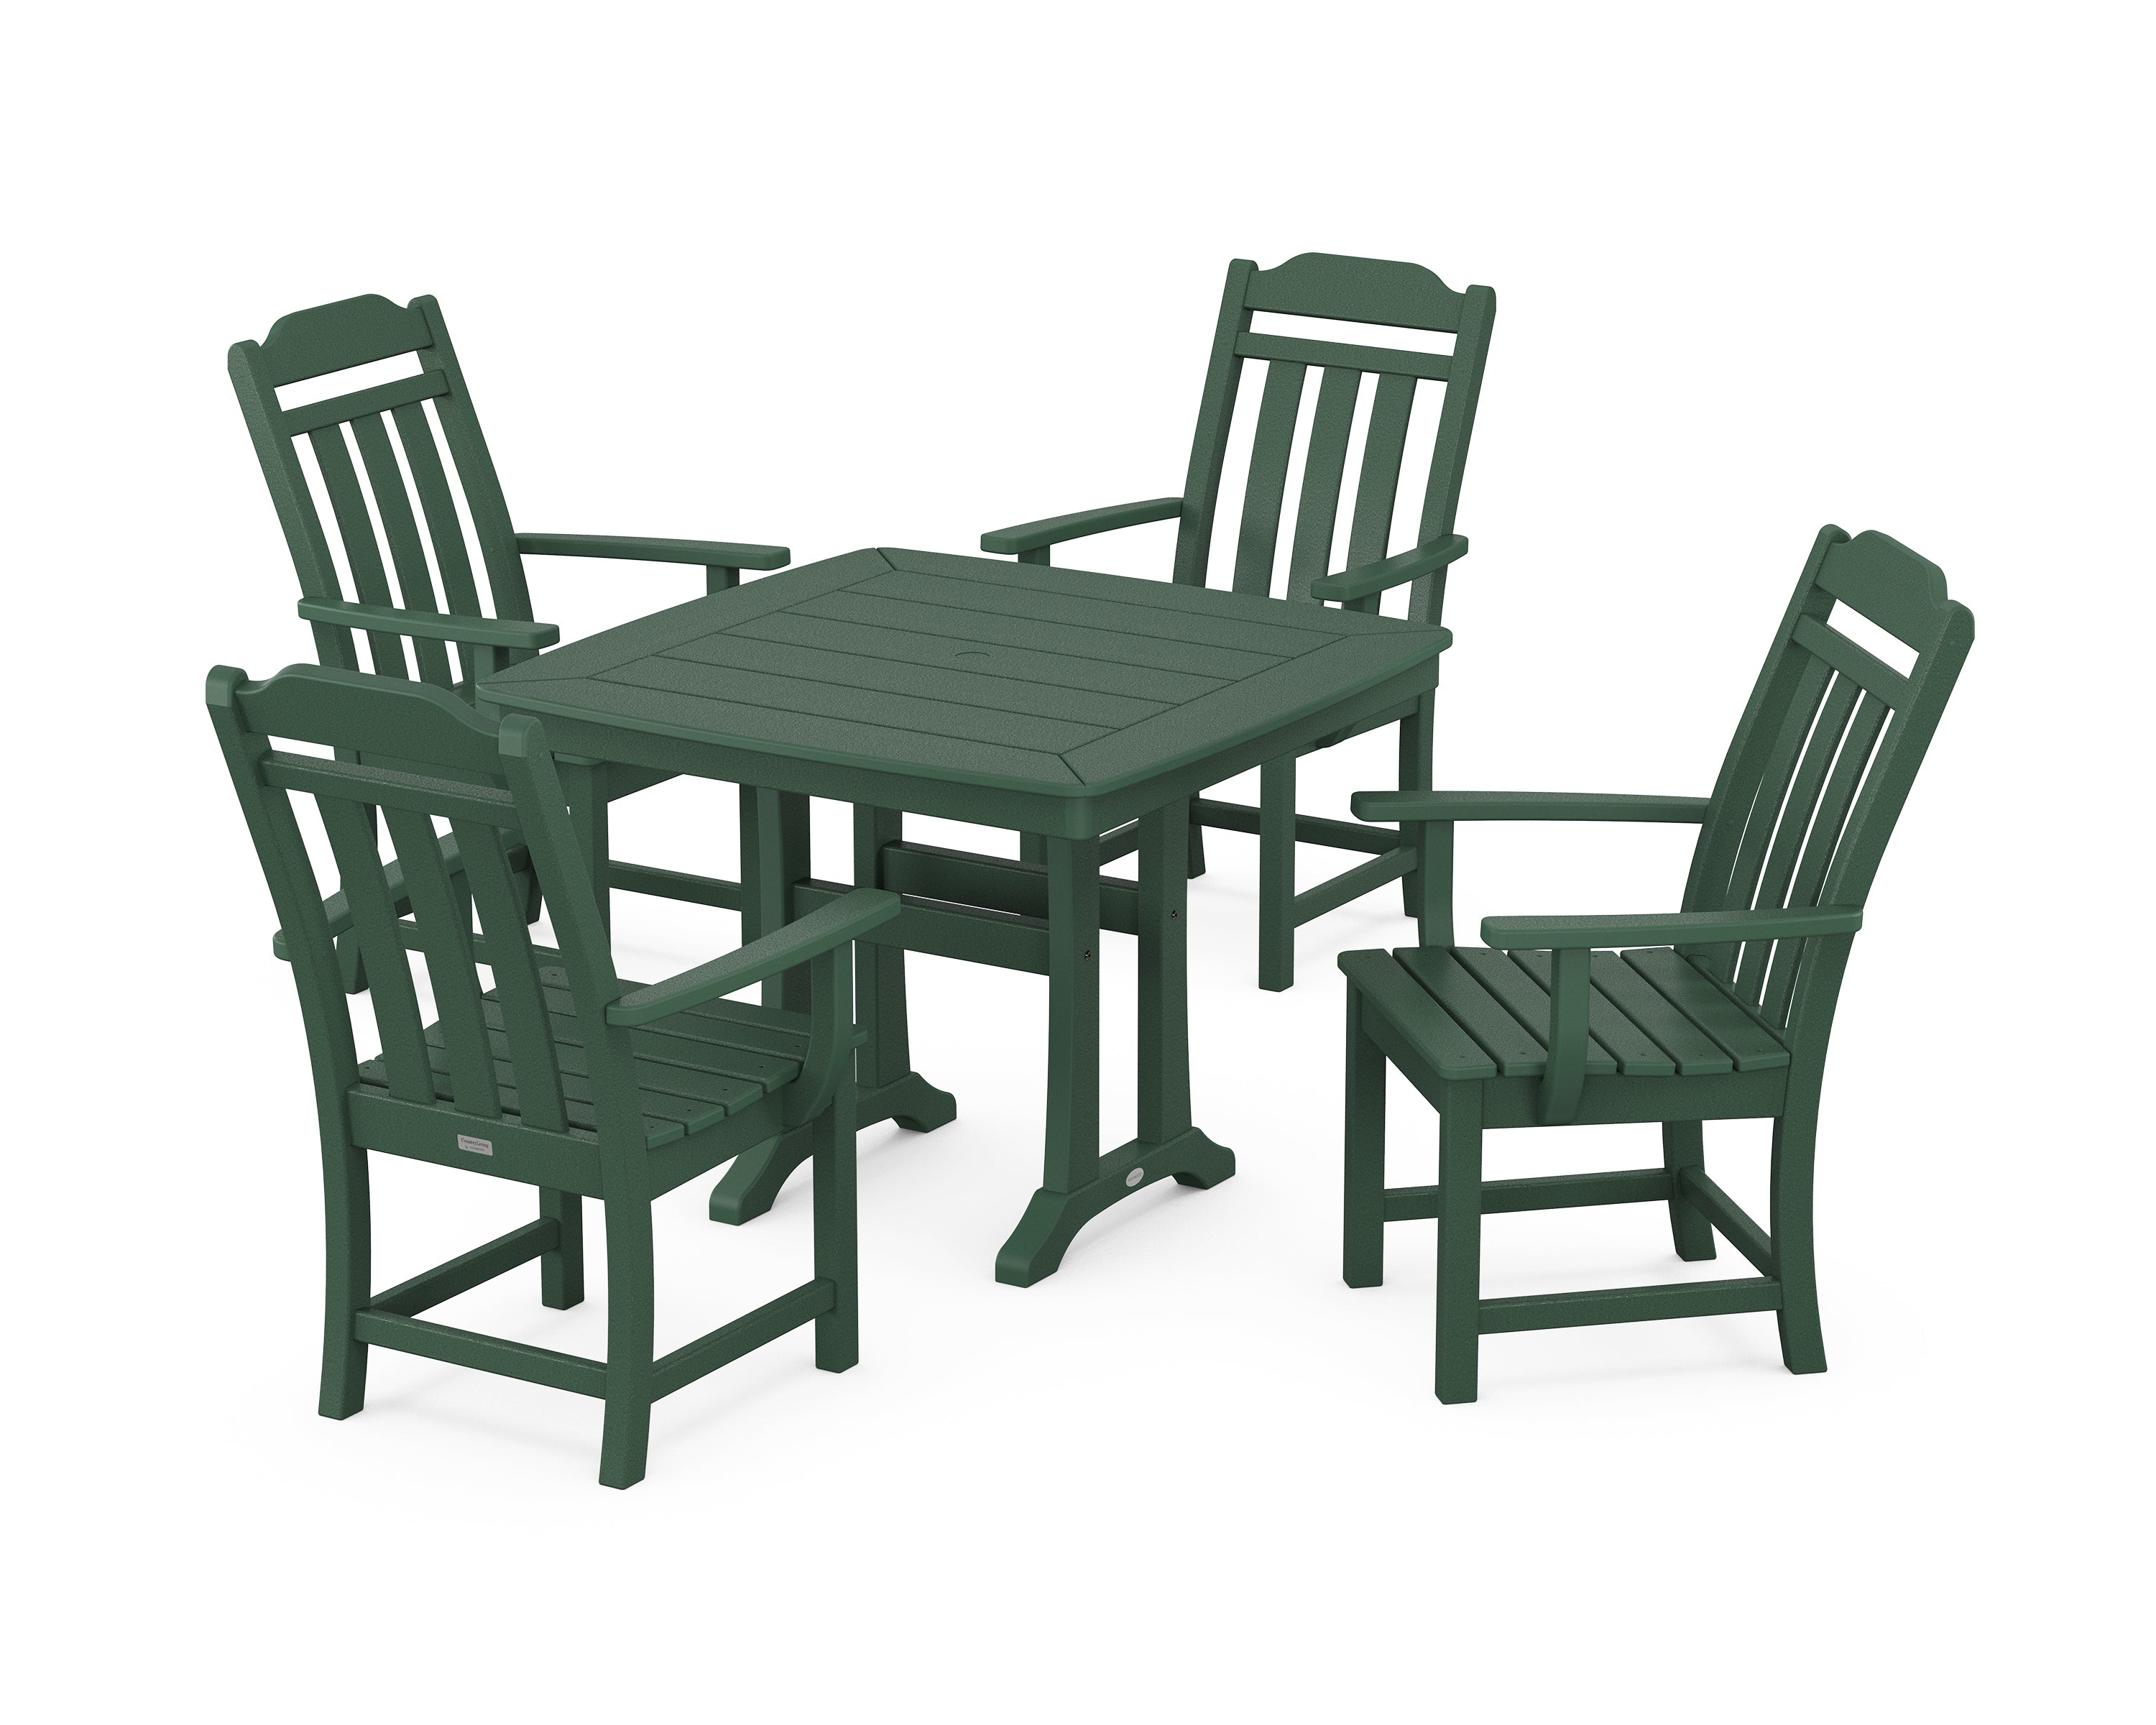 Polywood Country Living 5-Piece Dining Set with Trestle Legs in Green